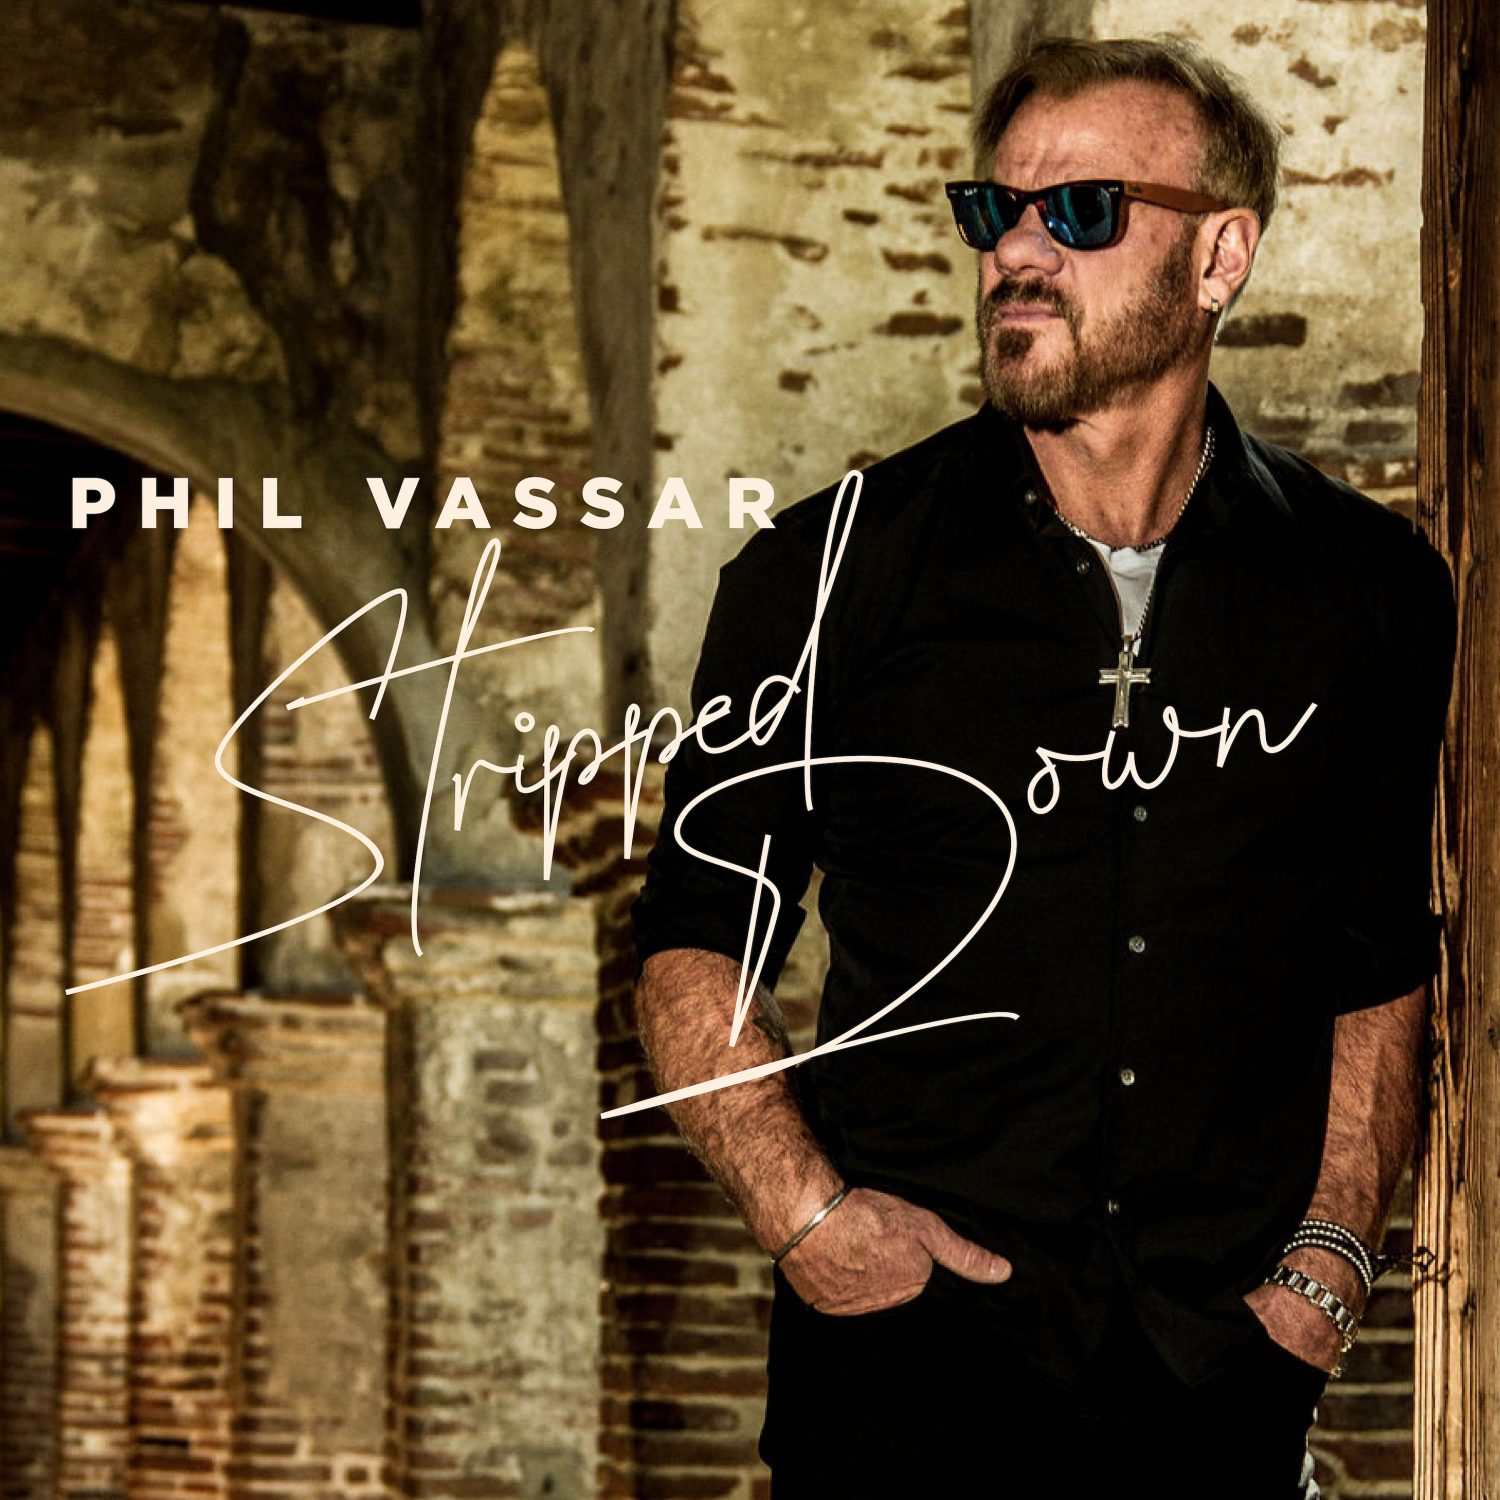 Phil Vassar Gets 'Stripped Down' on New Album and Tour Sounds Like